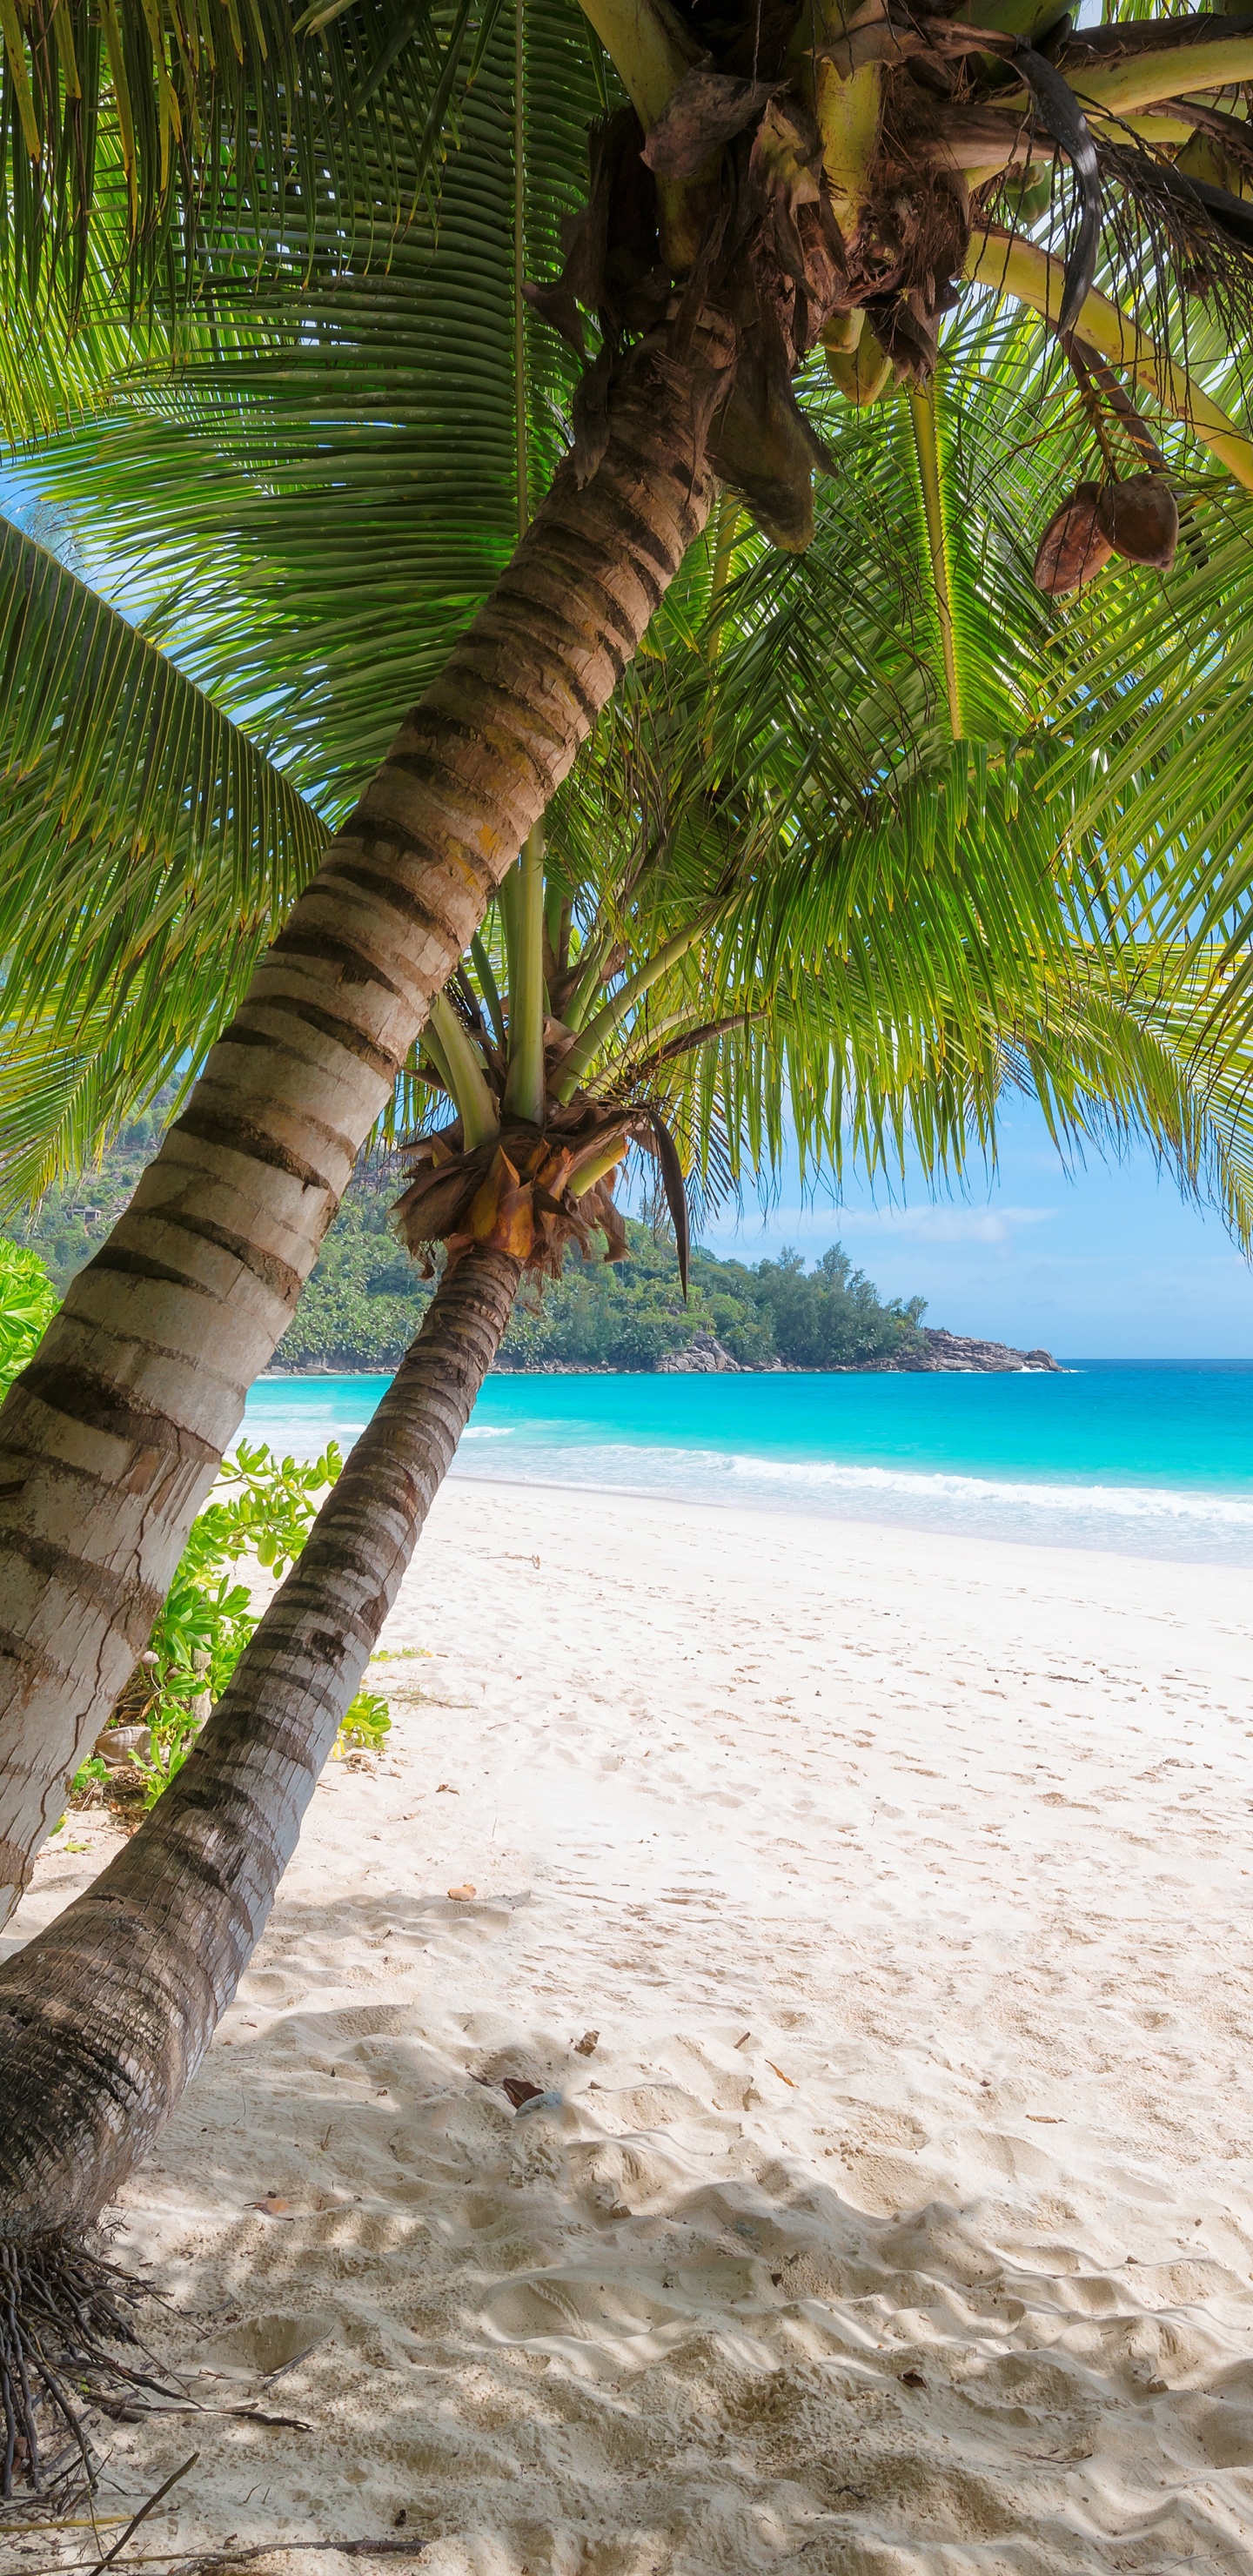 Coconut Tree on White Sand Beach During Daytime. Wallpaper in 1440x2960 Resolution